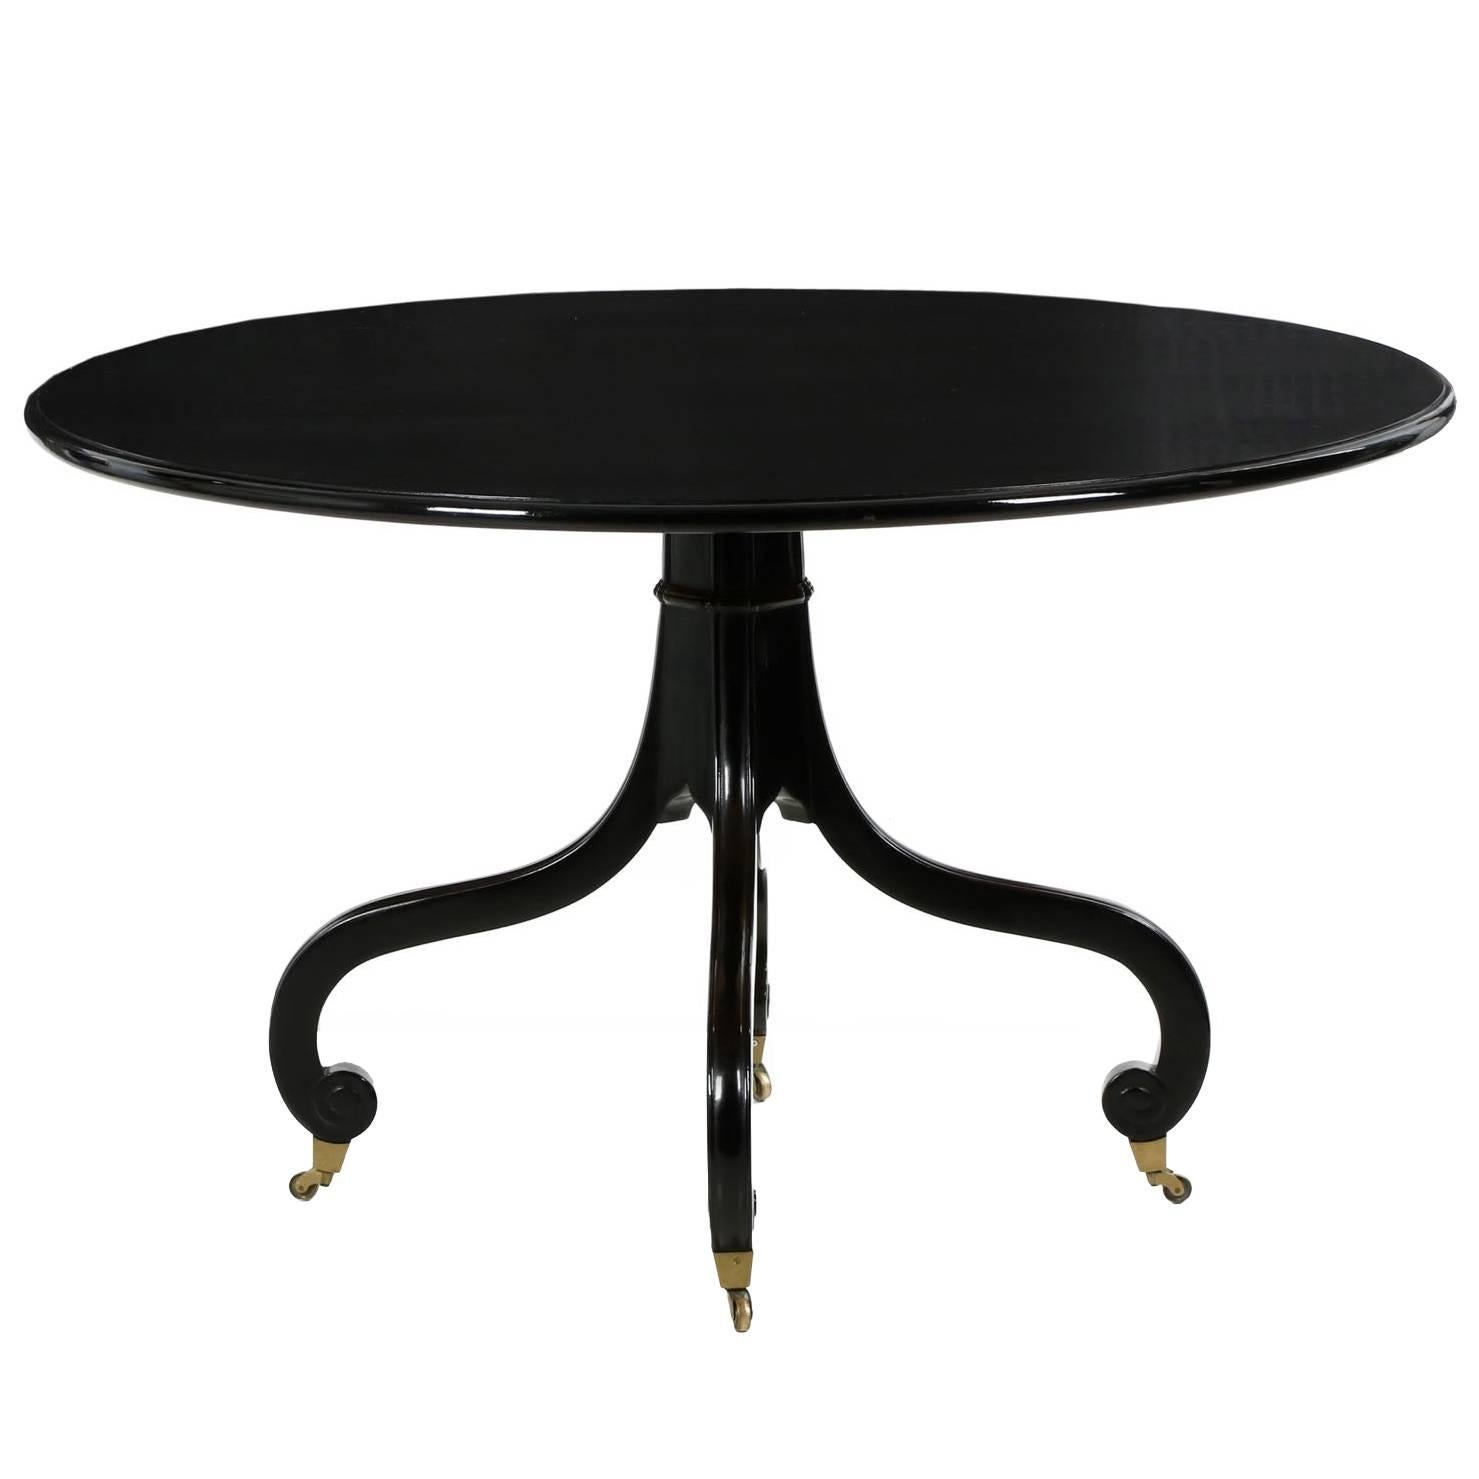 Regency Black Lacquered Circular Dining Table by Dessin Fournier, 21st Century